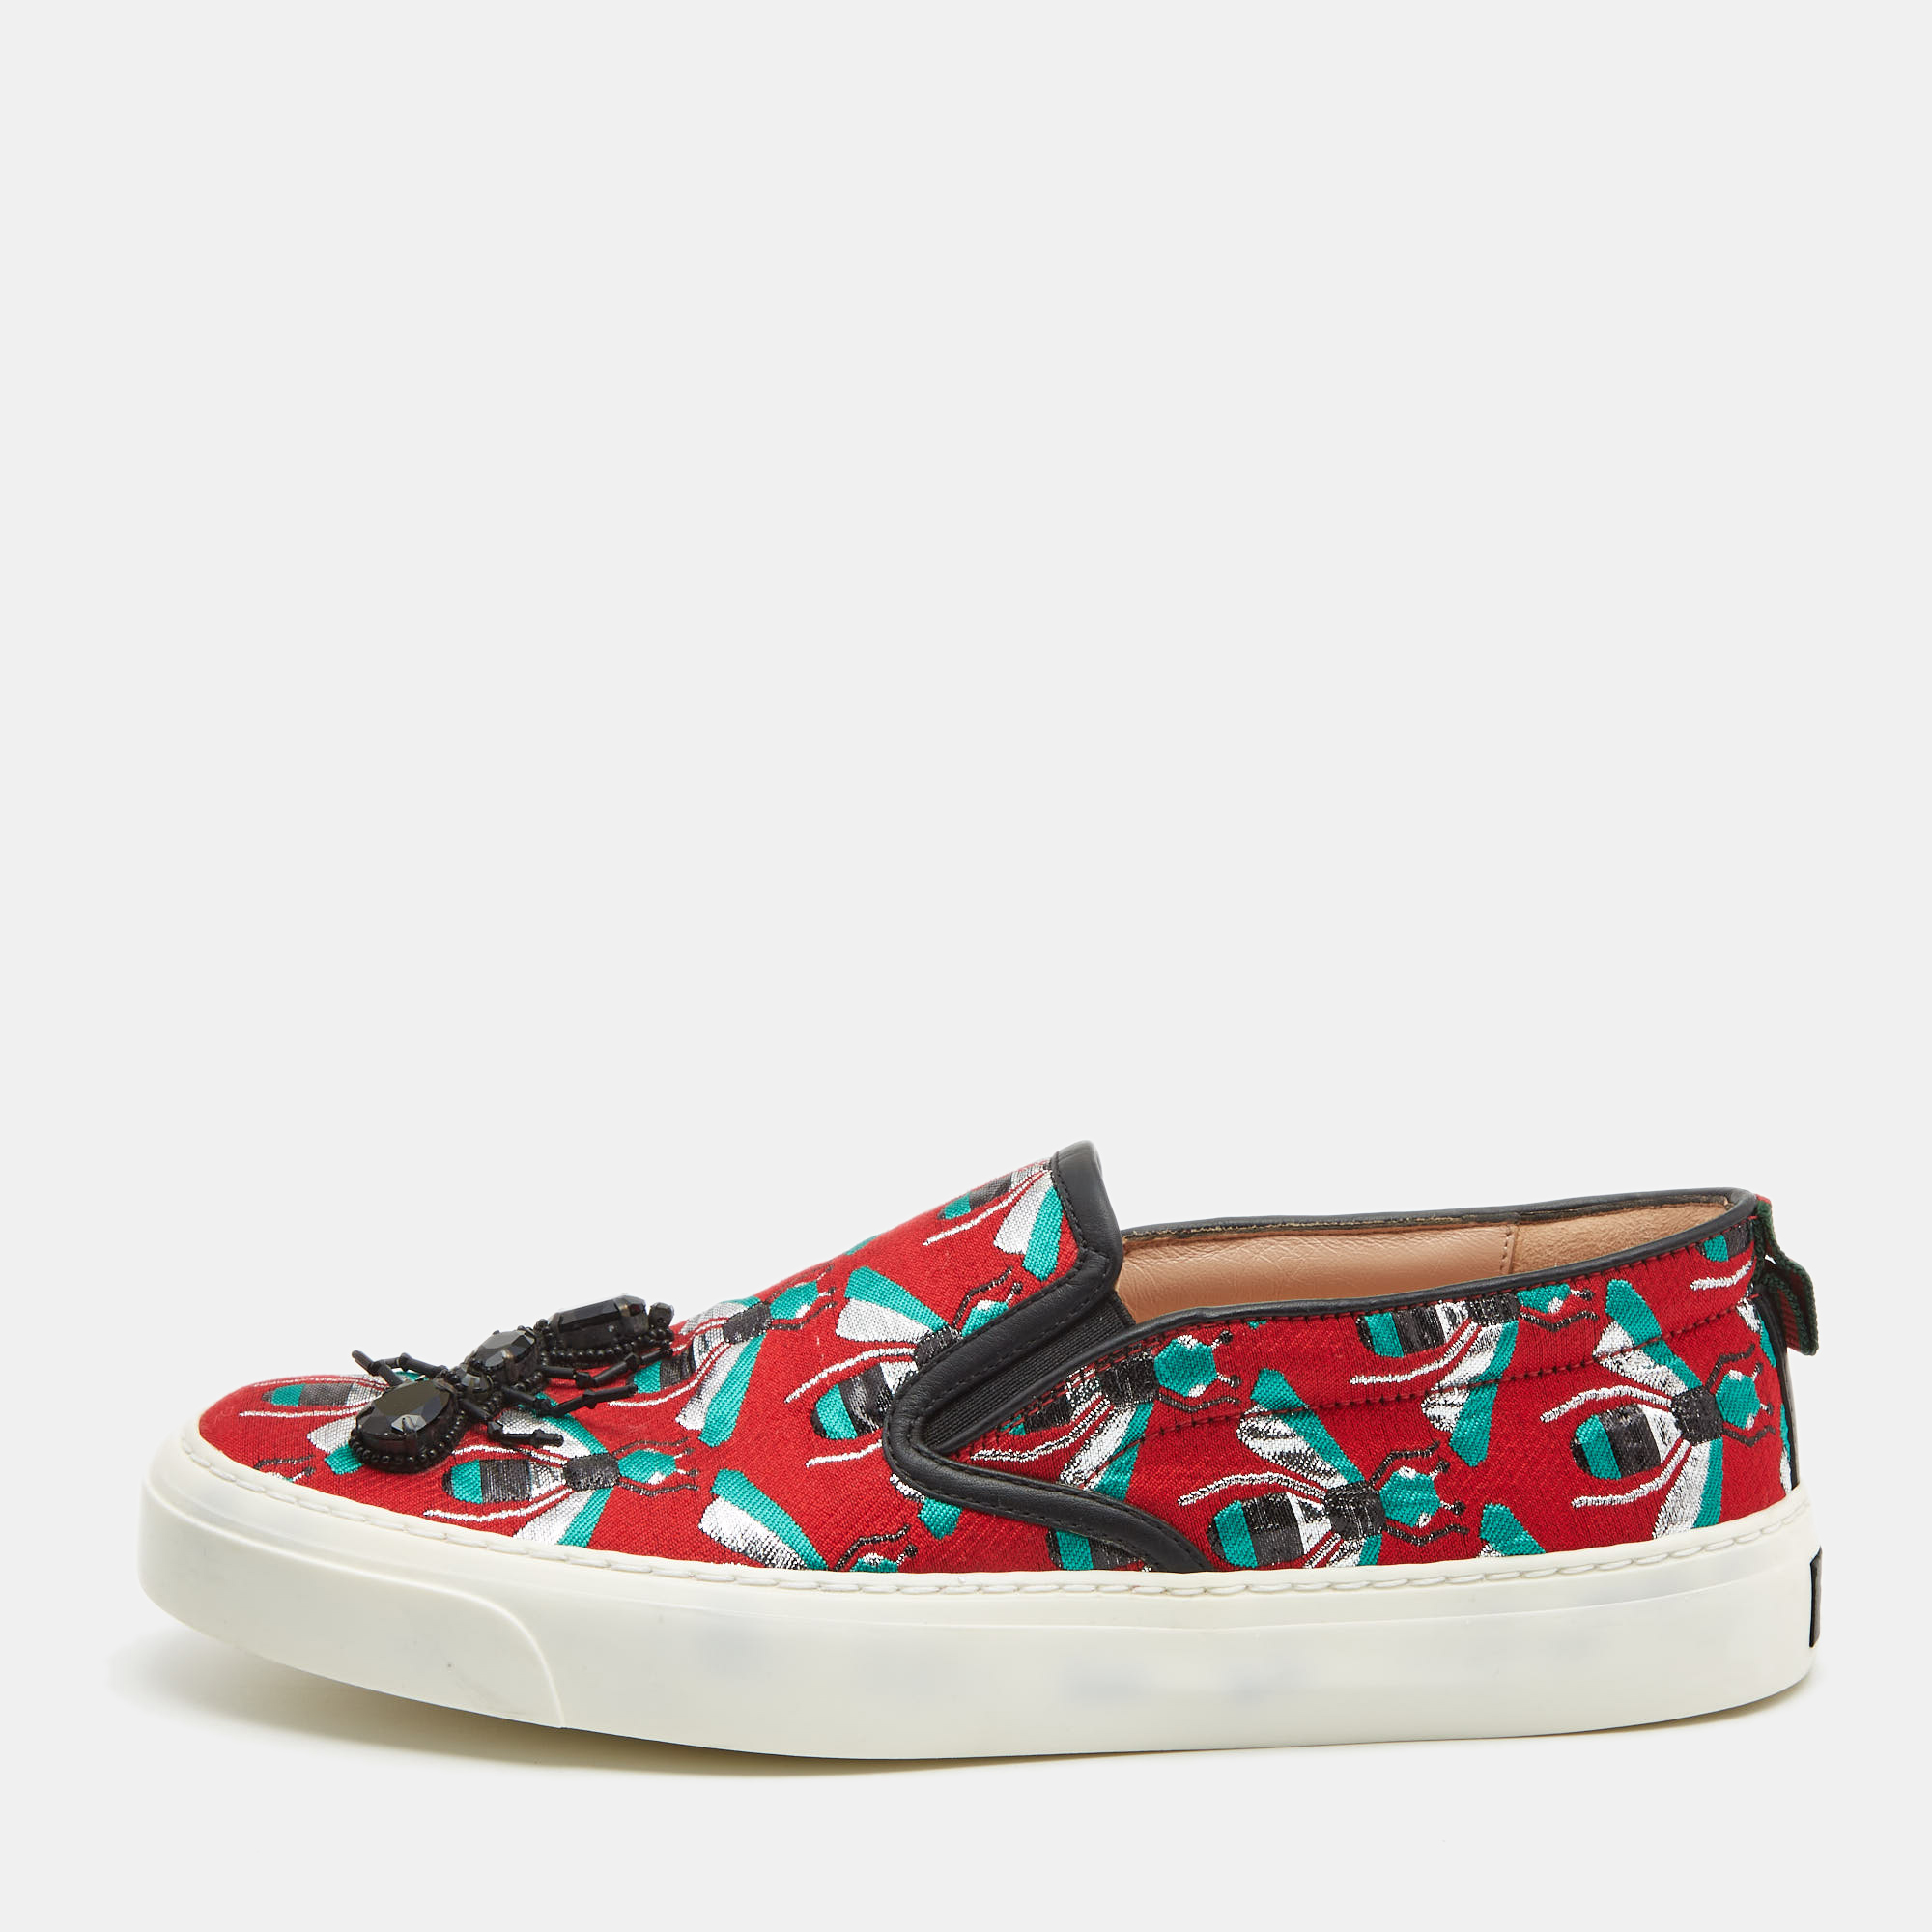 Gucci red bee jacquard fabric  and leather ant embellished slip on sneakers size 38